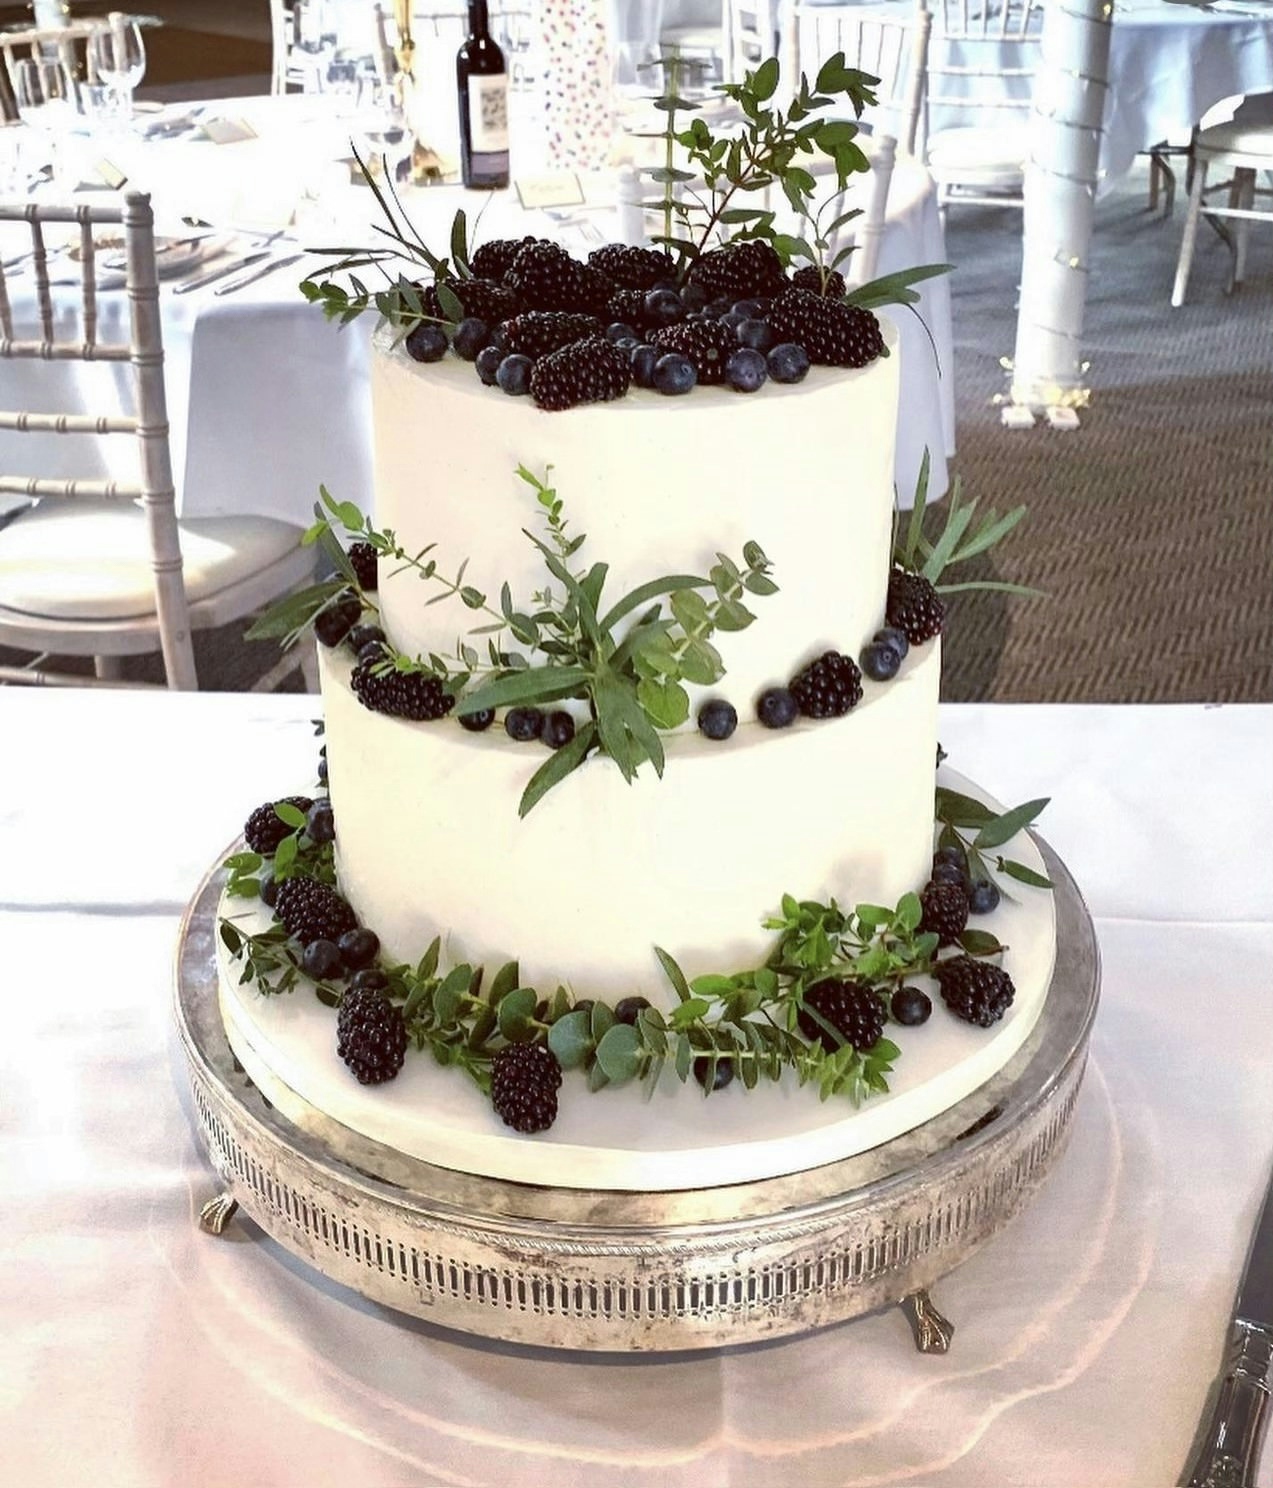 A wedding cake with blackberries and nature